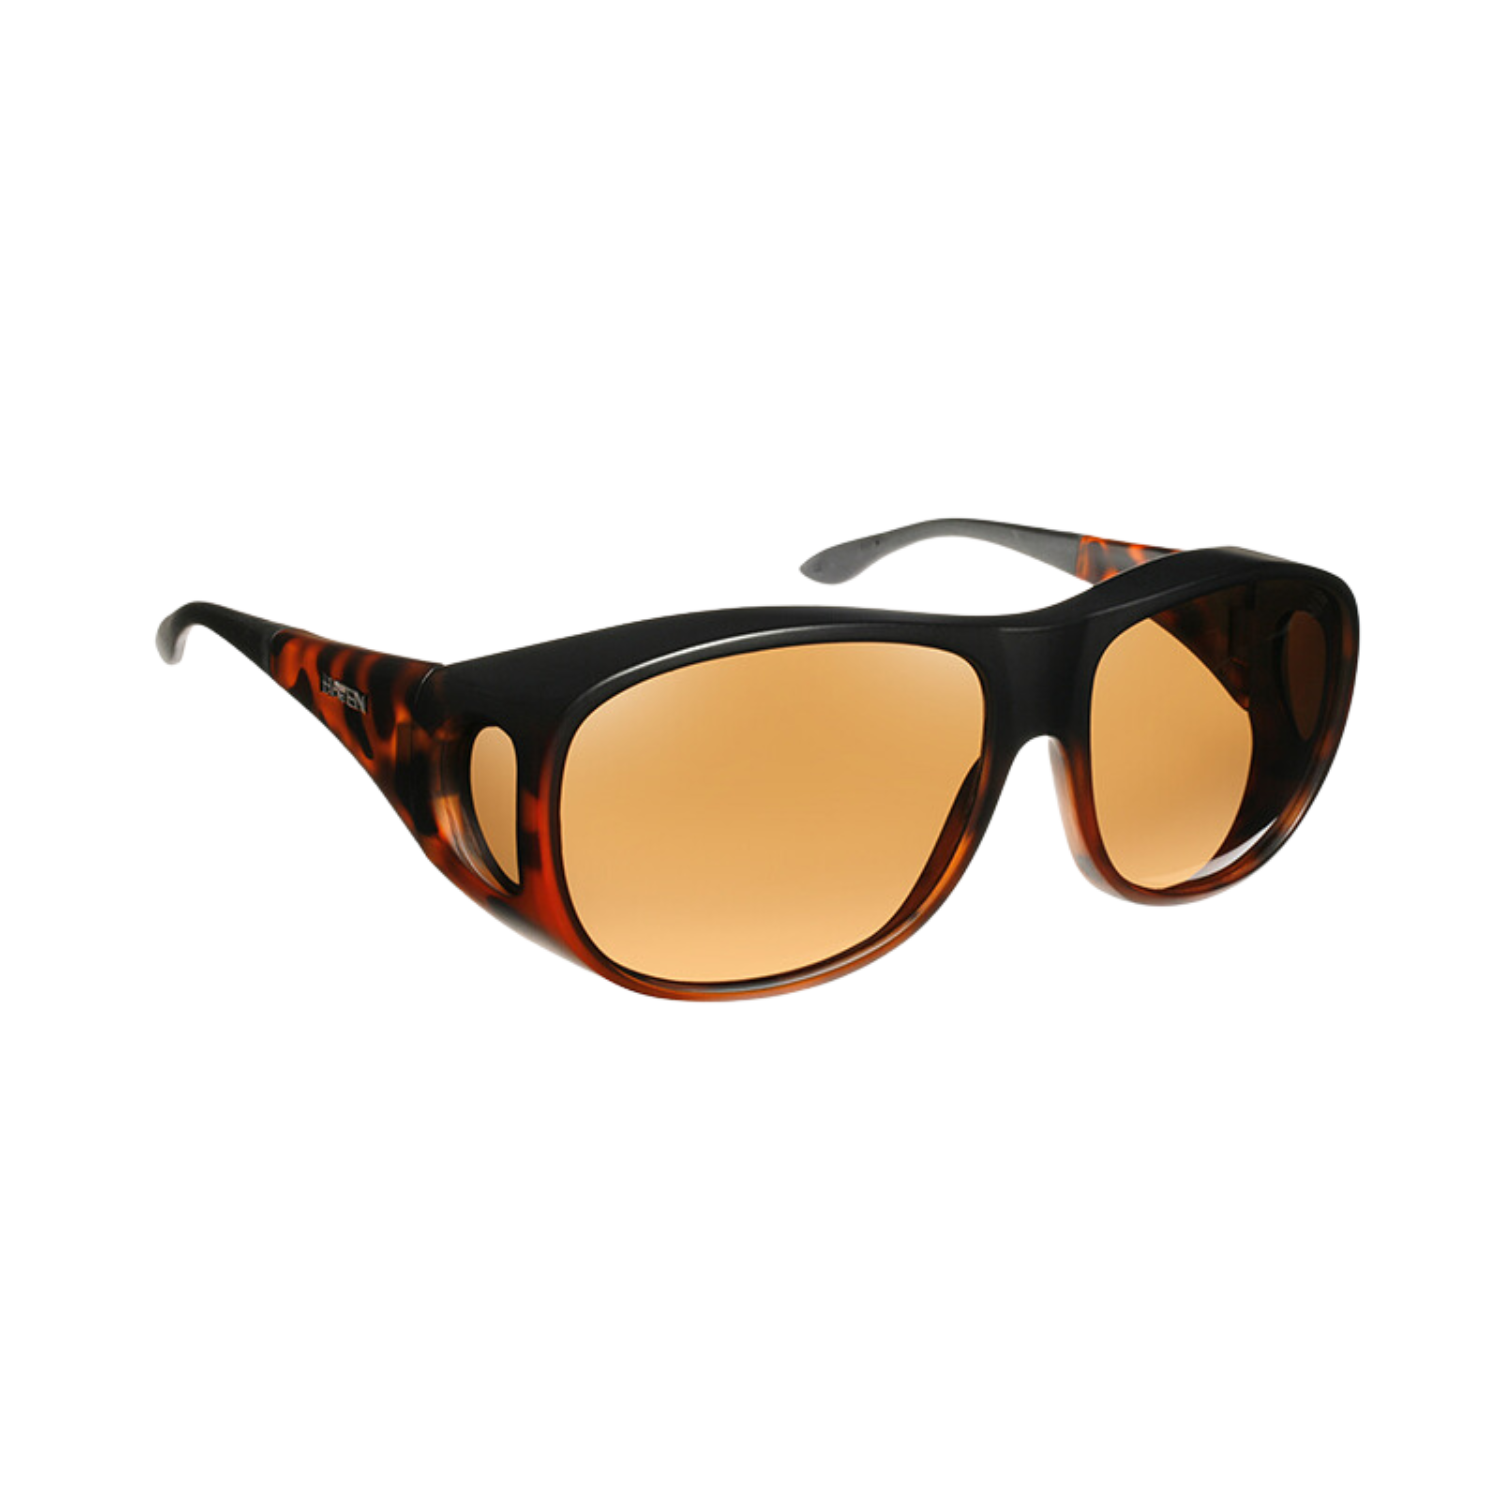 Image of Eschenbach's Haven Summerwood large fit-over polarized sunglasses with brown tortoise frames and amber lenses.